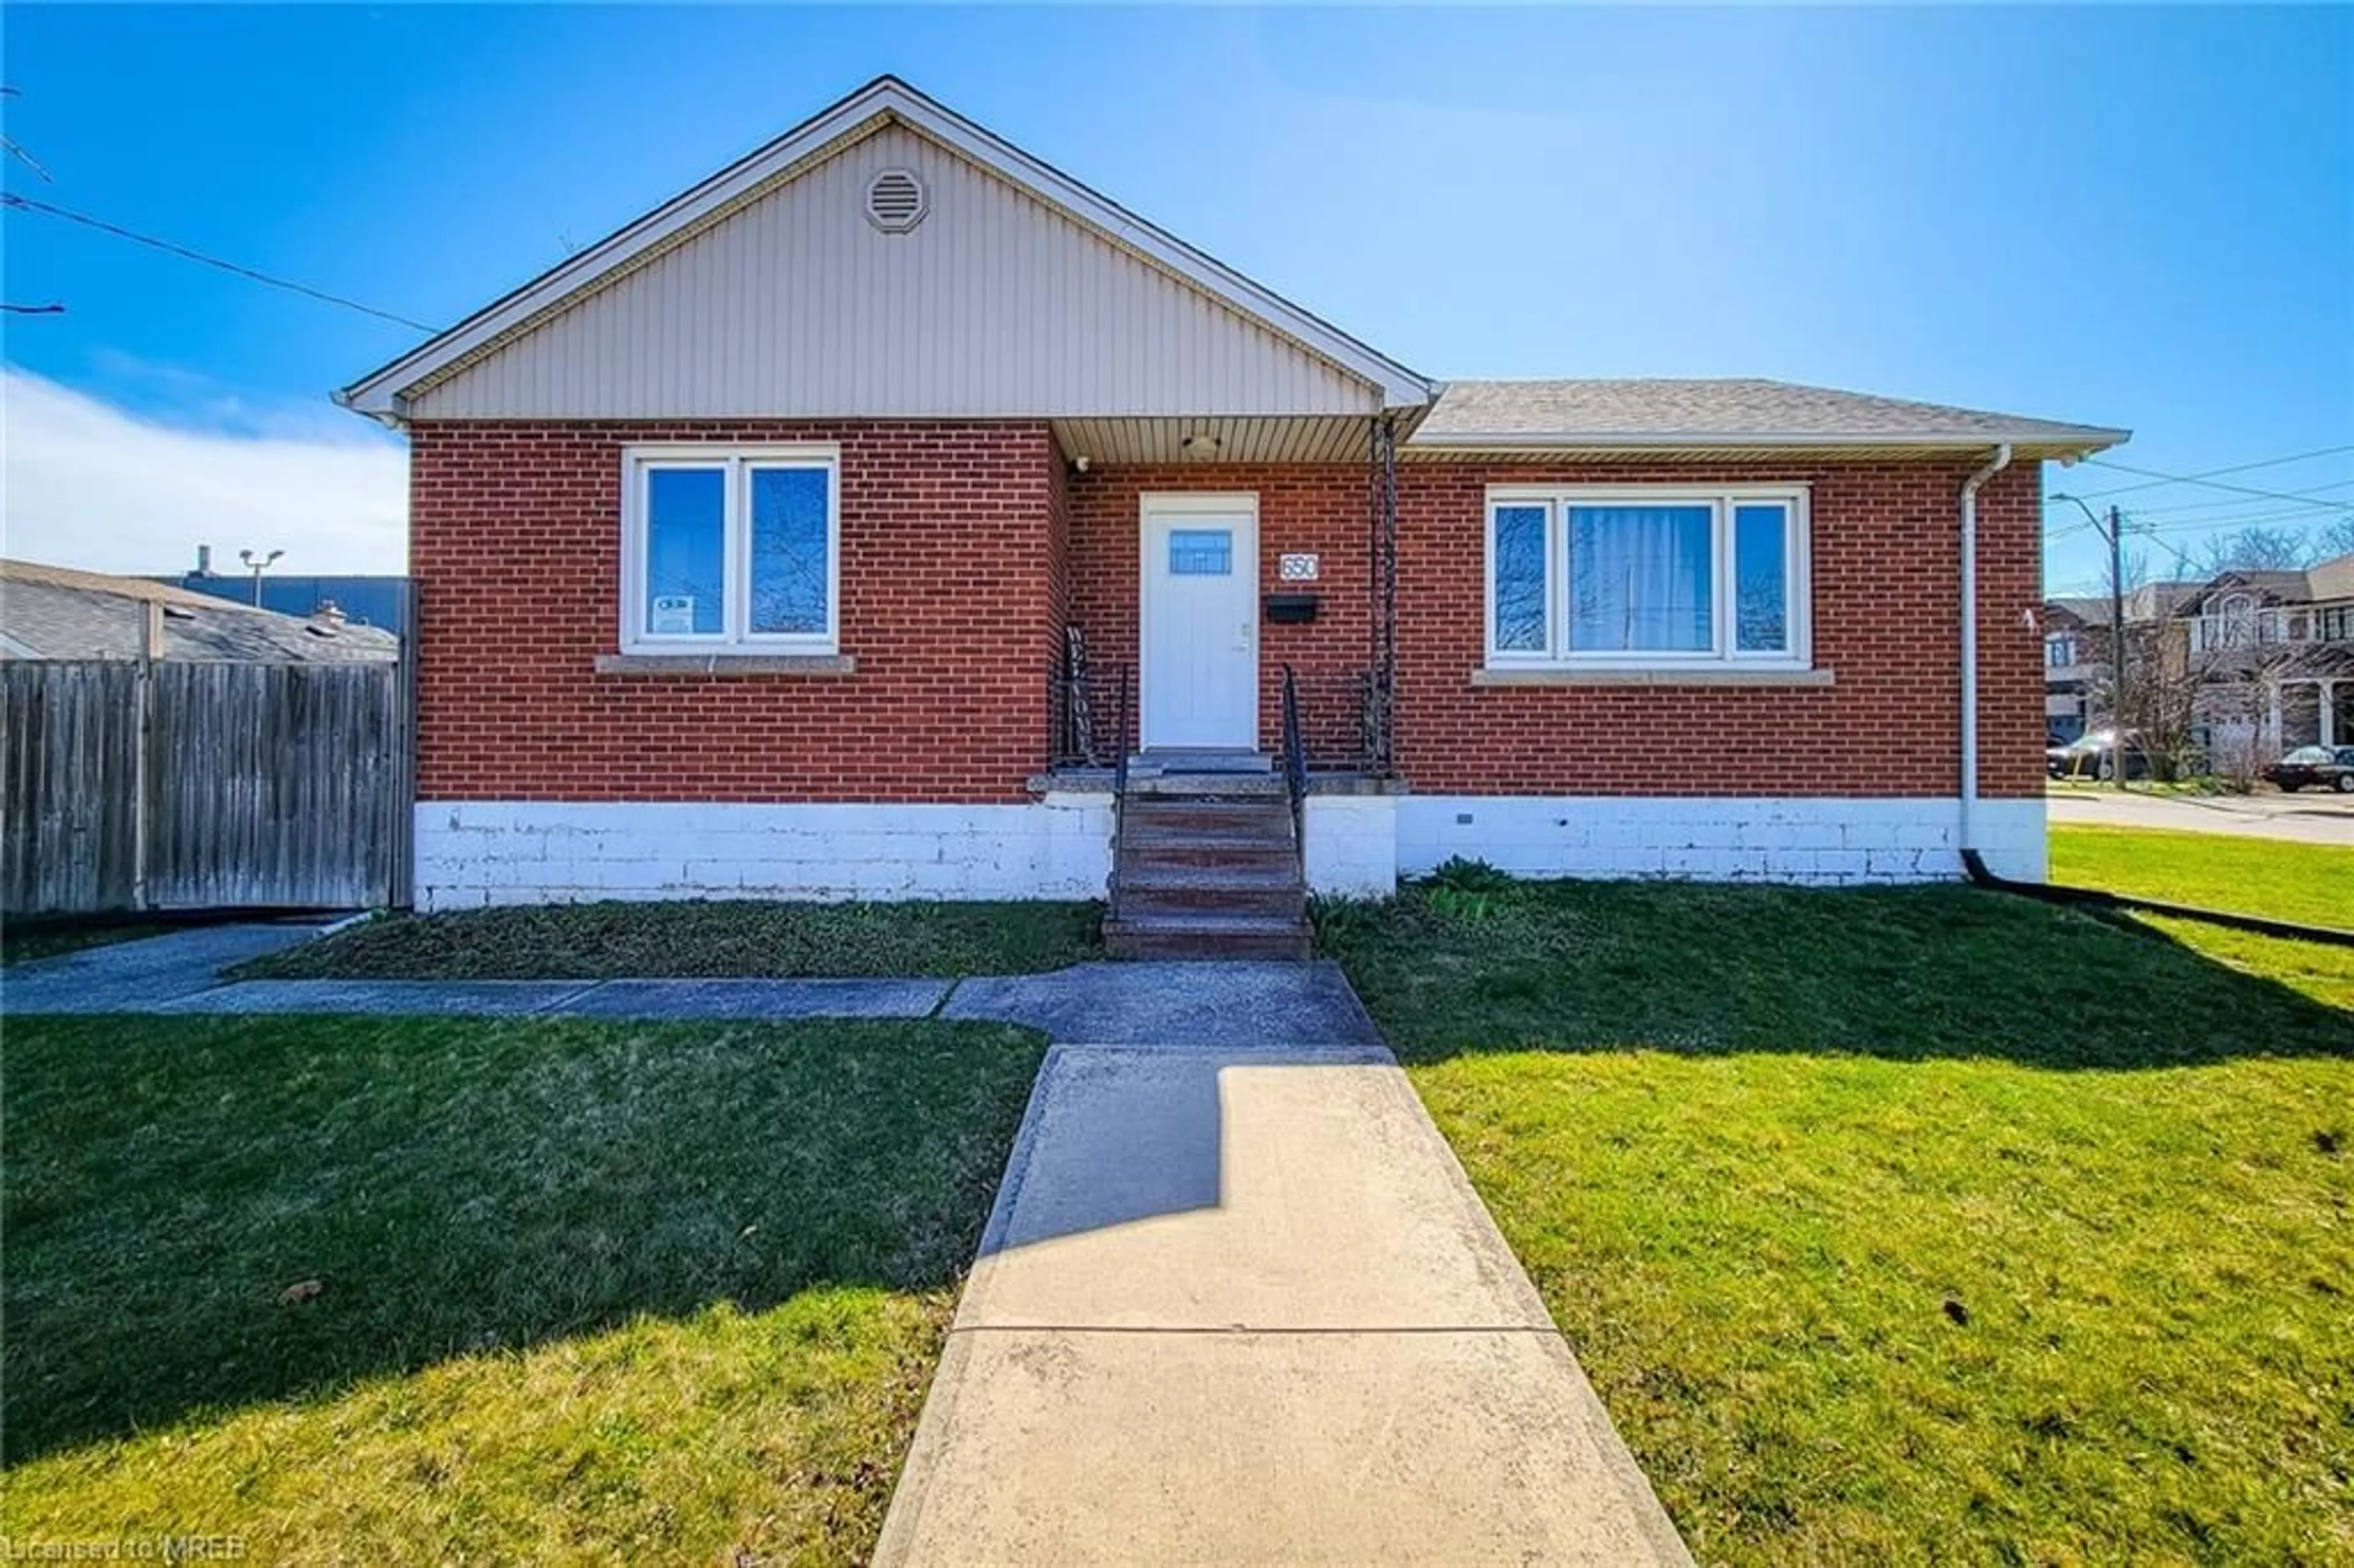 Home with brick exterior material for 650 Dunn Ave, Hamilton Ontario L8H 6M6